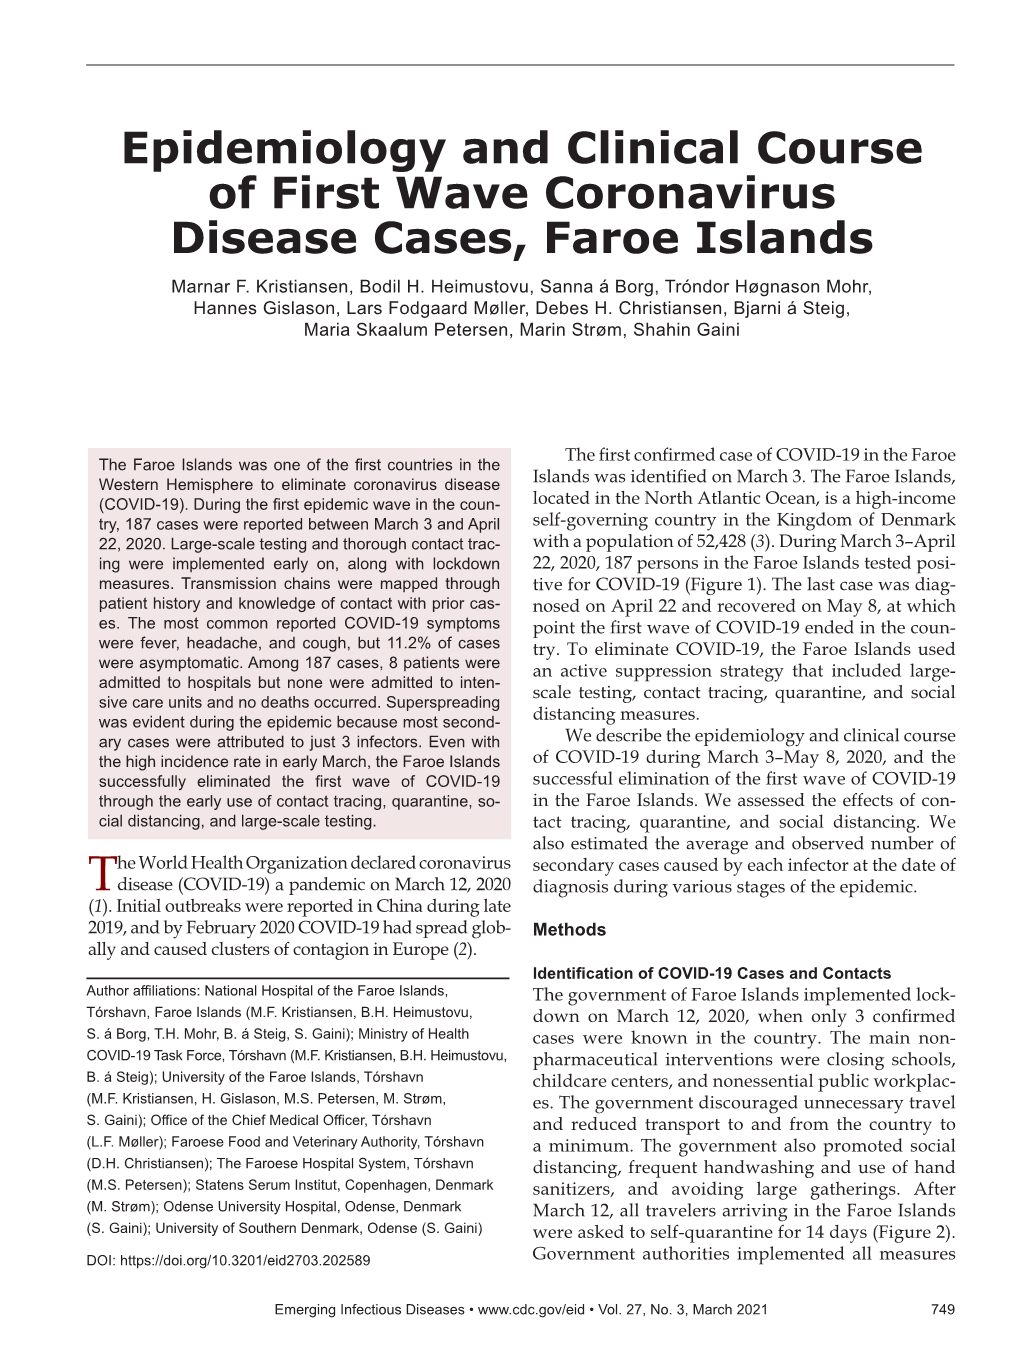 Epidemiology and Clinical Course of First Wave Coronavirus Disease Cases, Faroe Islands Marnar F